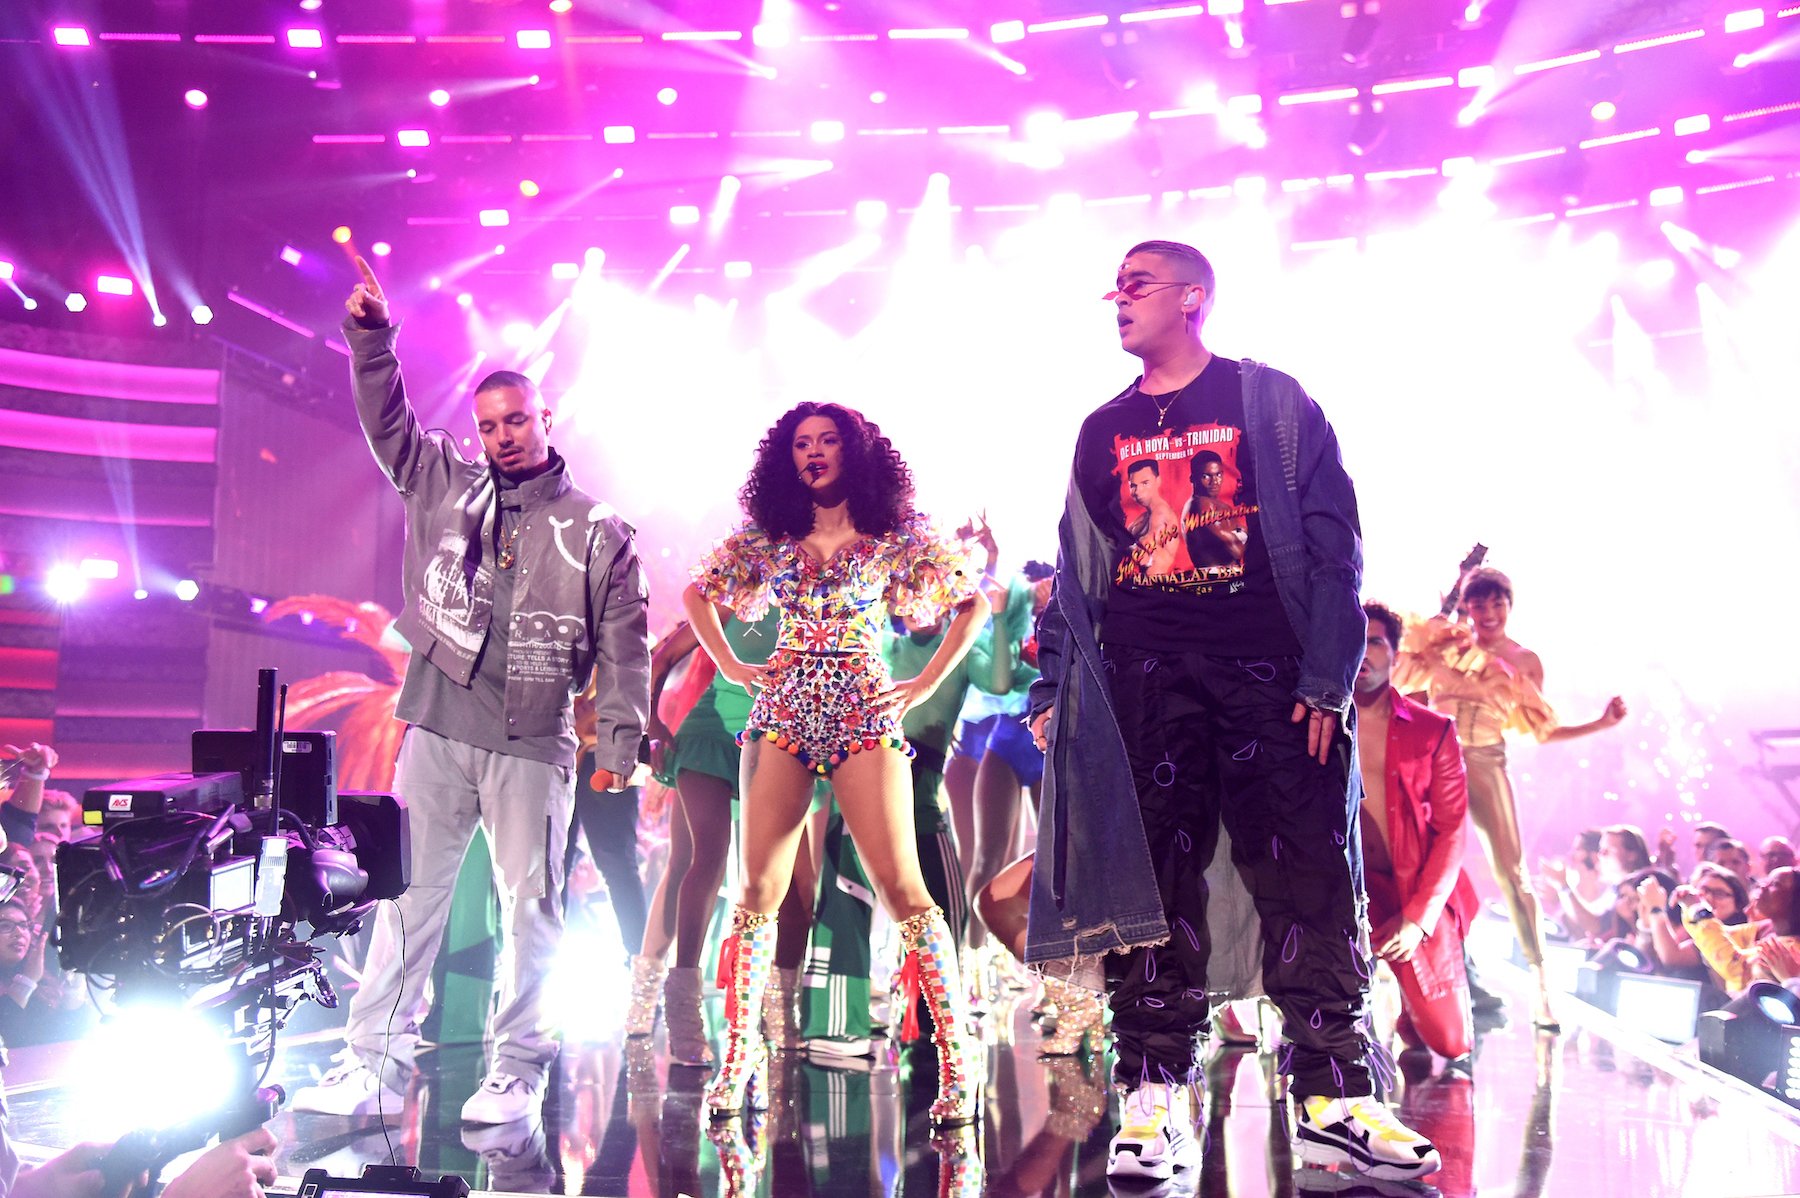 J Balvin, Cardi B, and Bad Bunny perform onstage during the 2018 American Music Awards